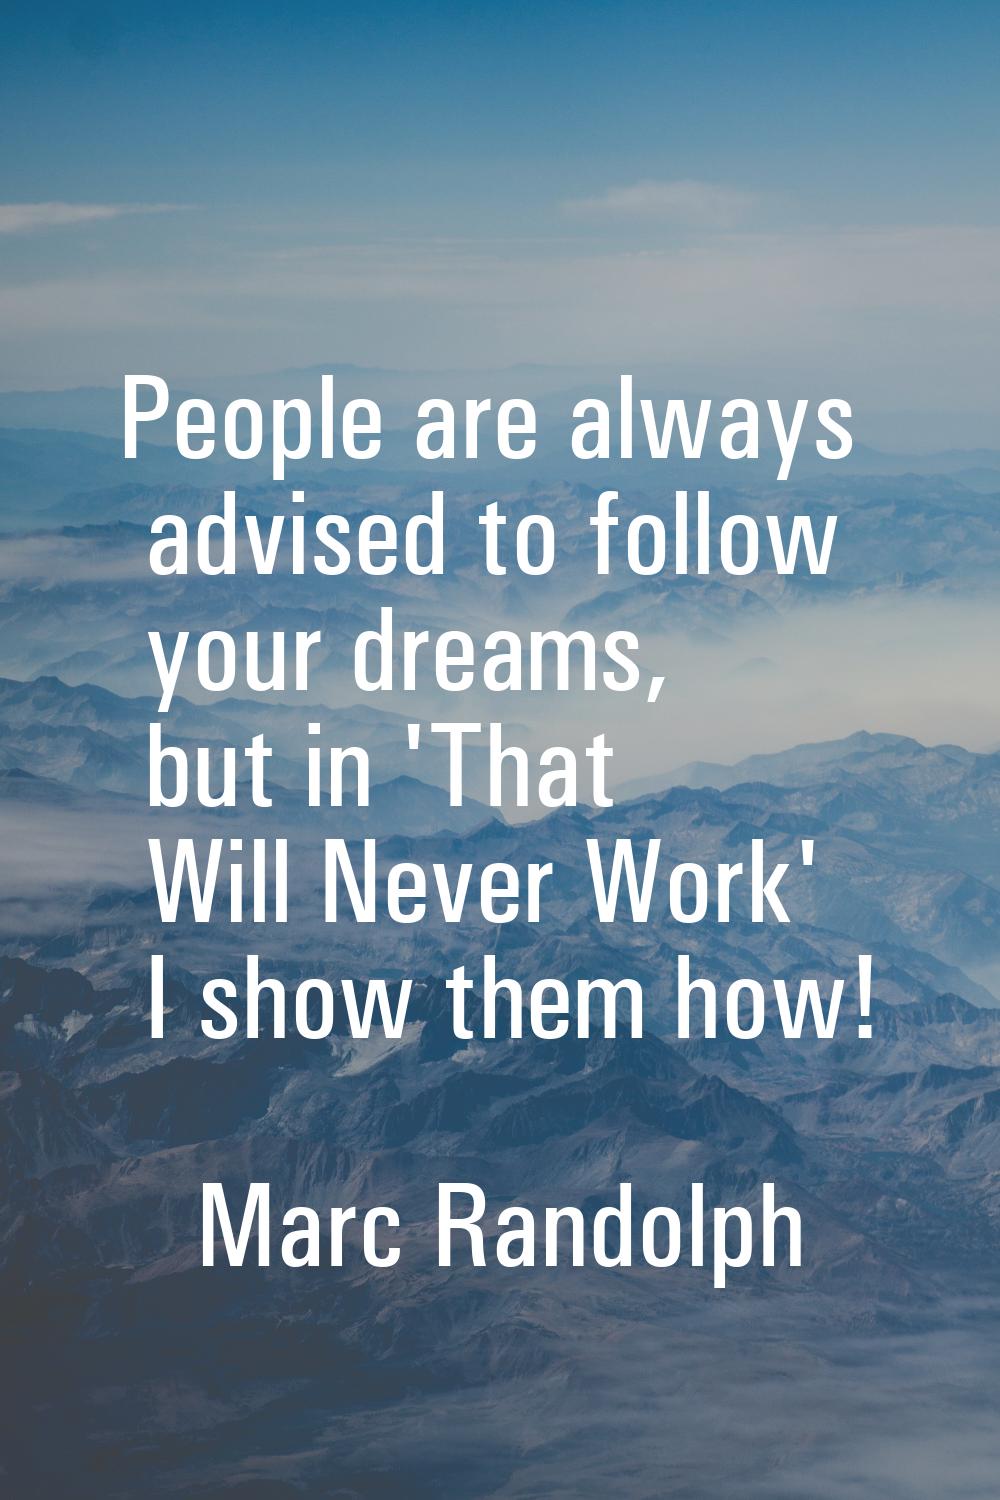 People are always advised to follow your dreams, but in 'That Will Never Work' I show them how!